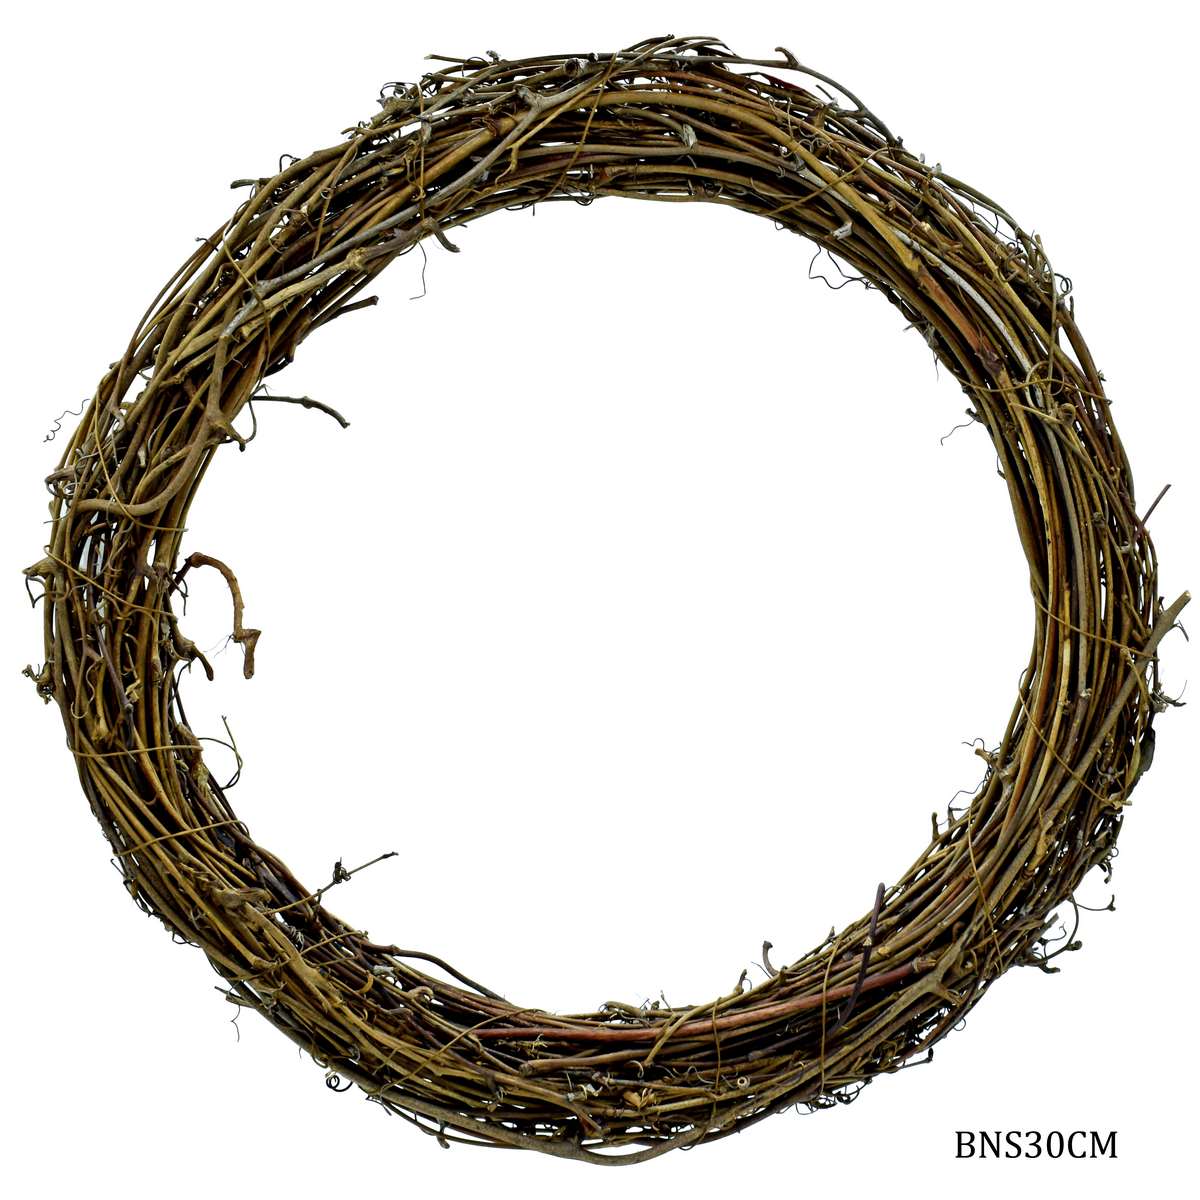 jags-mumbai Artificial Grass Elevate Your Home Decor with the Bird Nest Ring Round 30cm BNS30CM